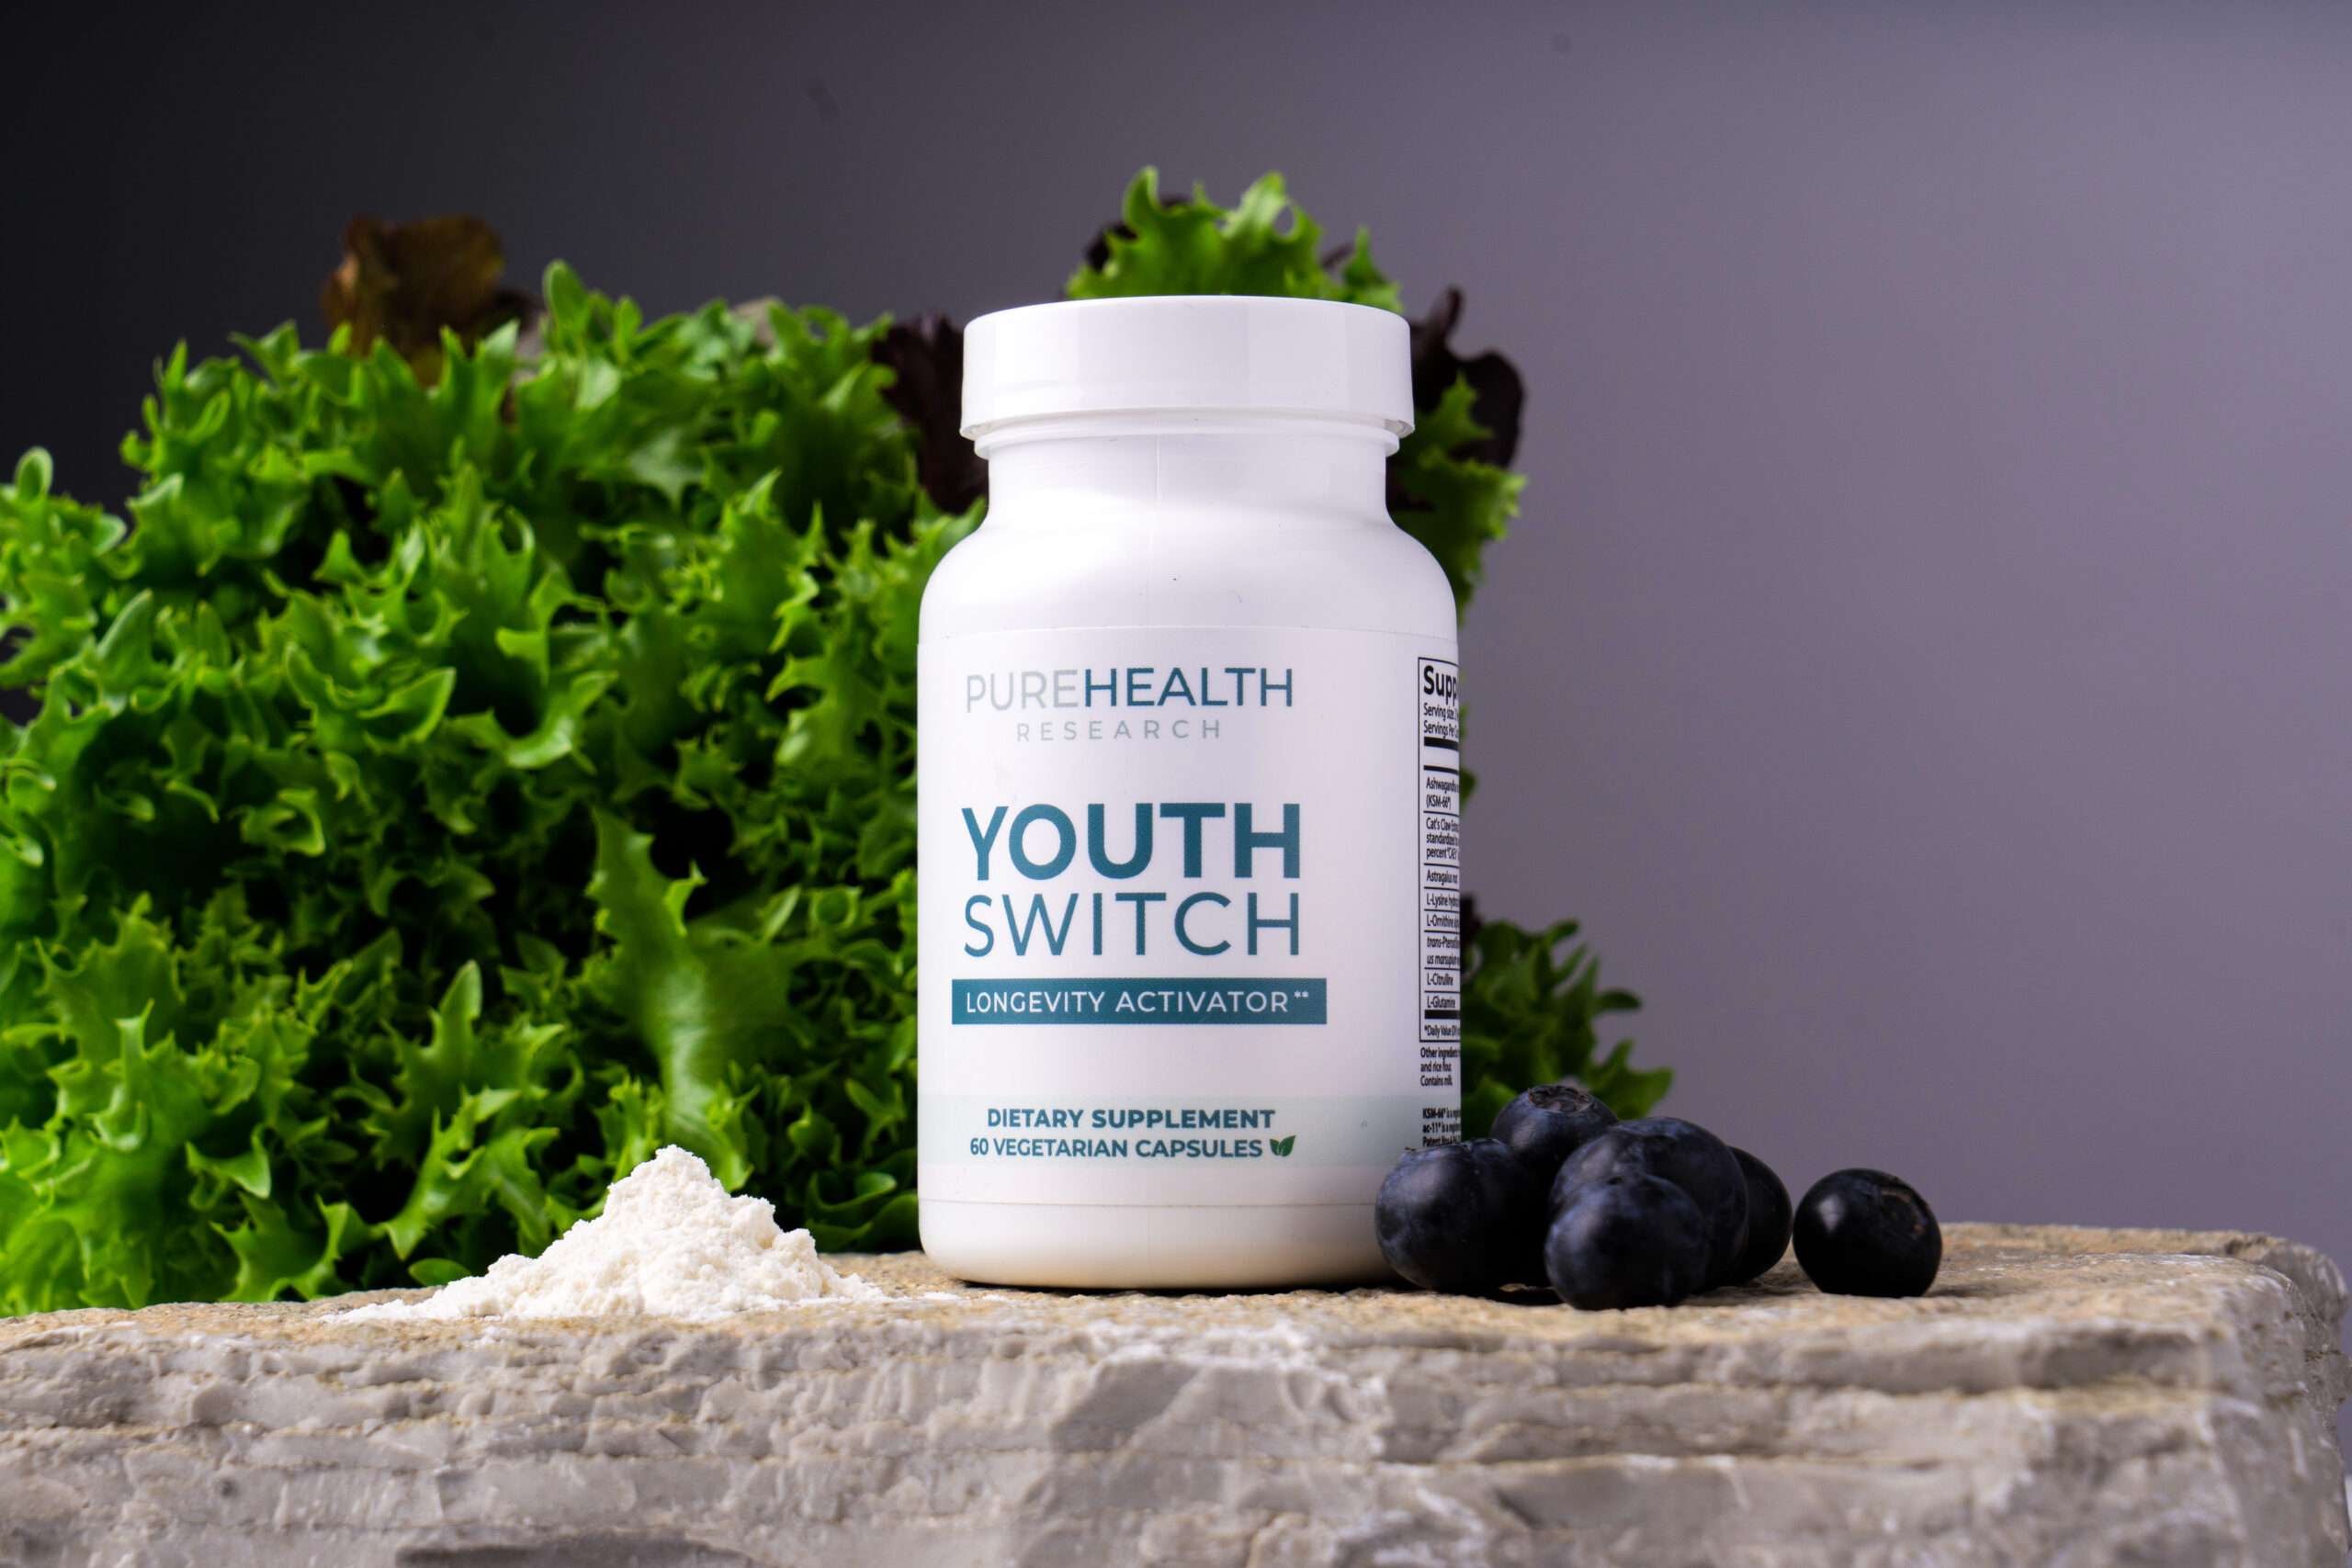 Youth Switch product by PureHealth Research